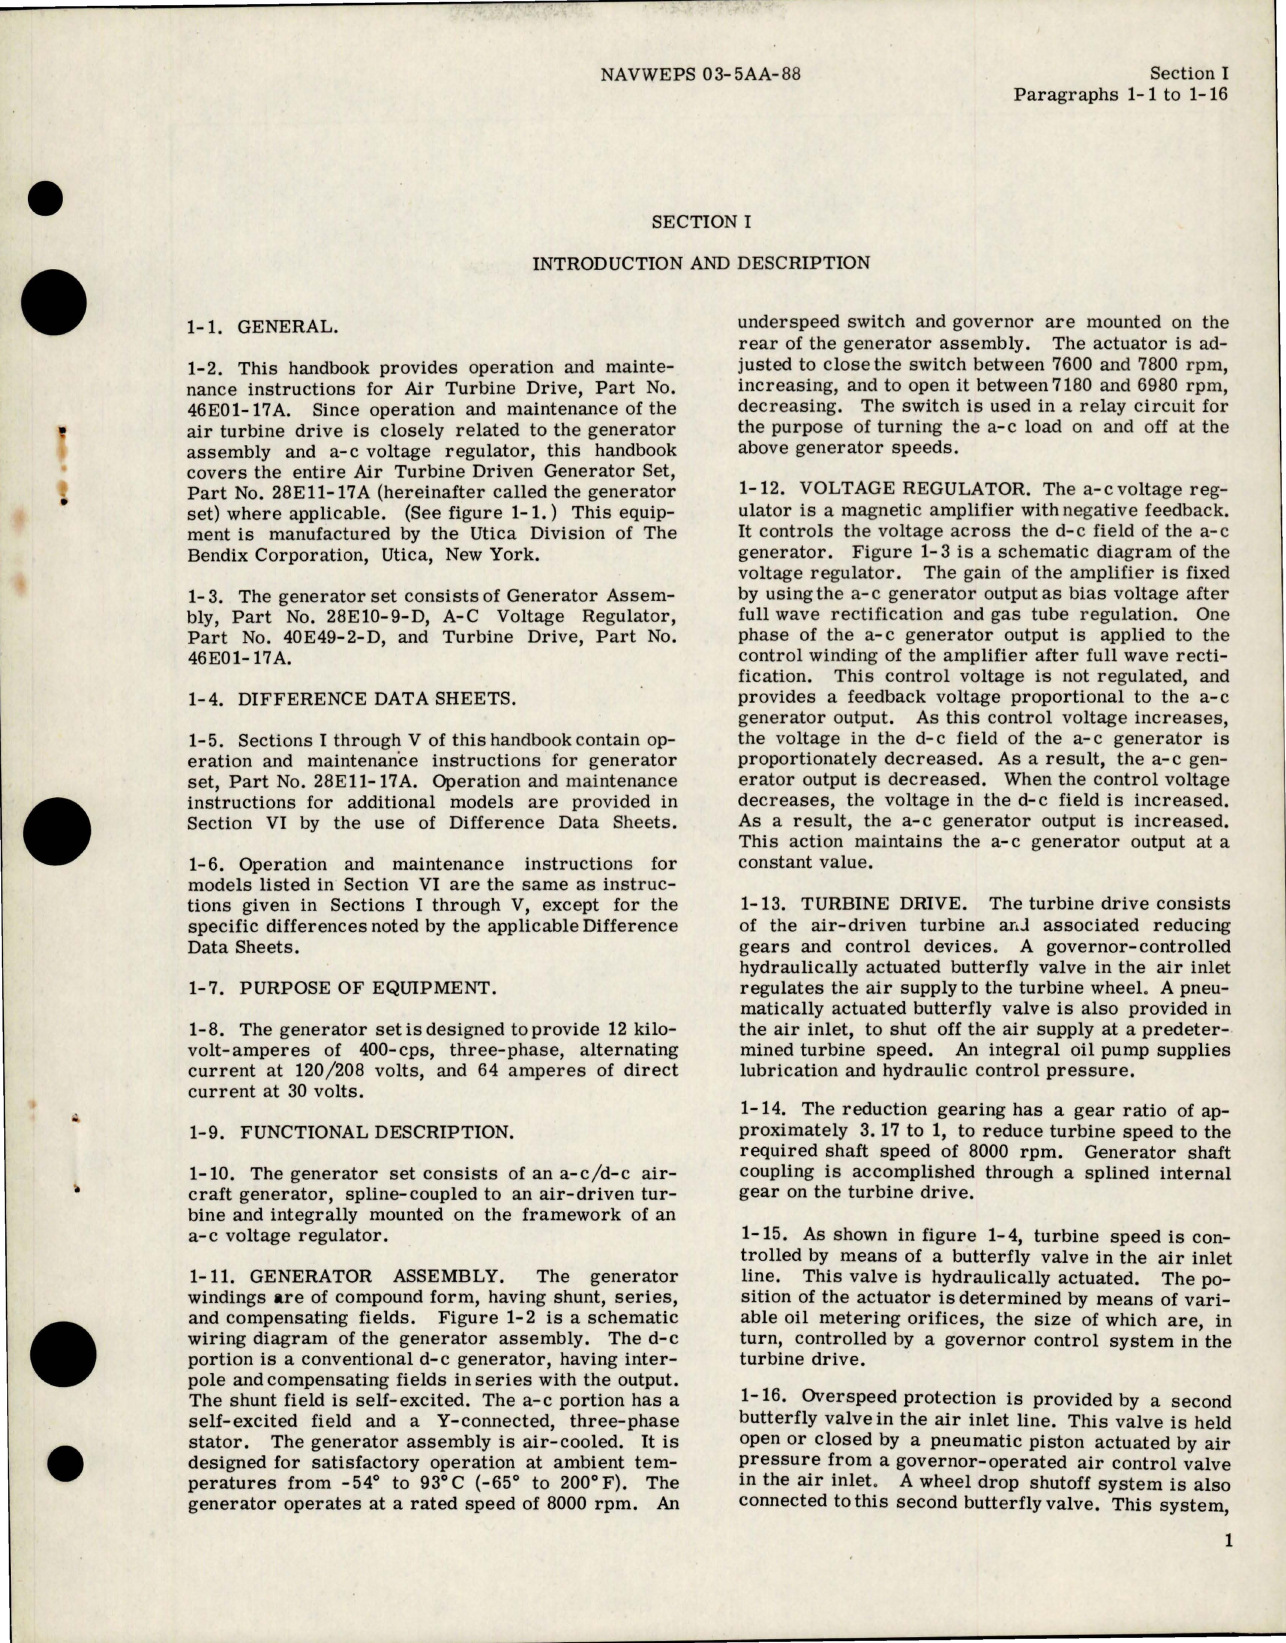 Sample page 5 from AirCorps Library document: Operation and Maintenance Instructions for Air Turbine Drive - Parts 46E01-15K, 46E01-17A 